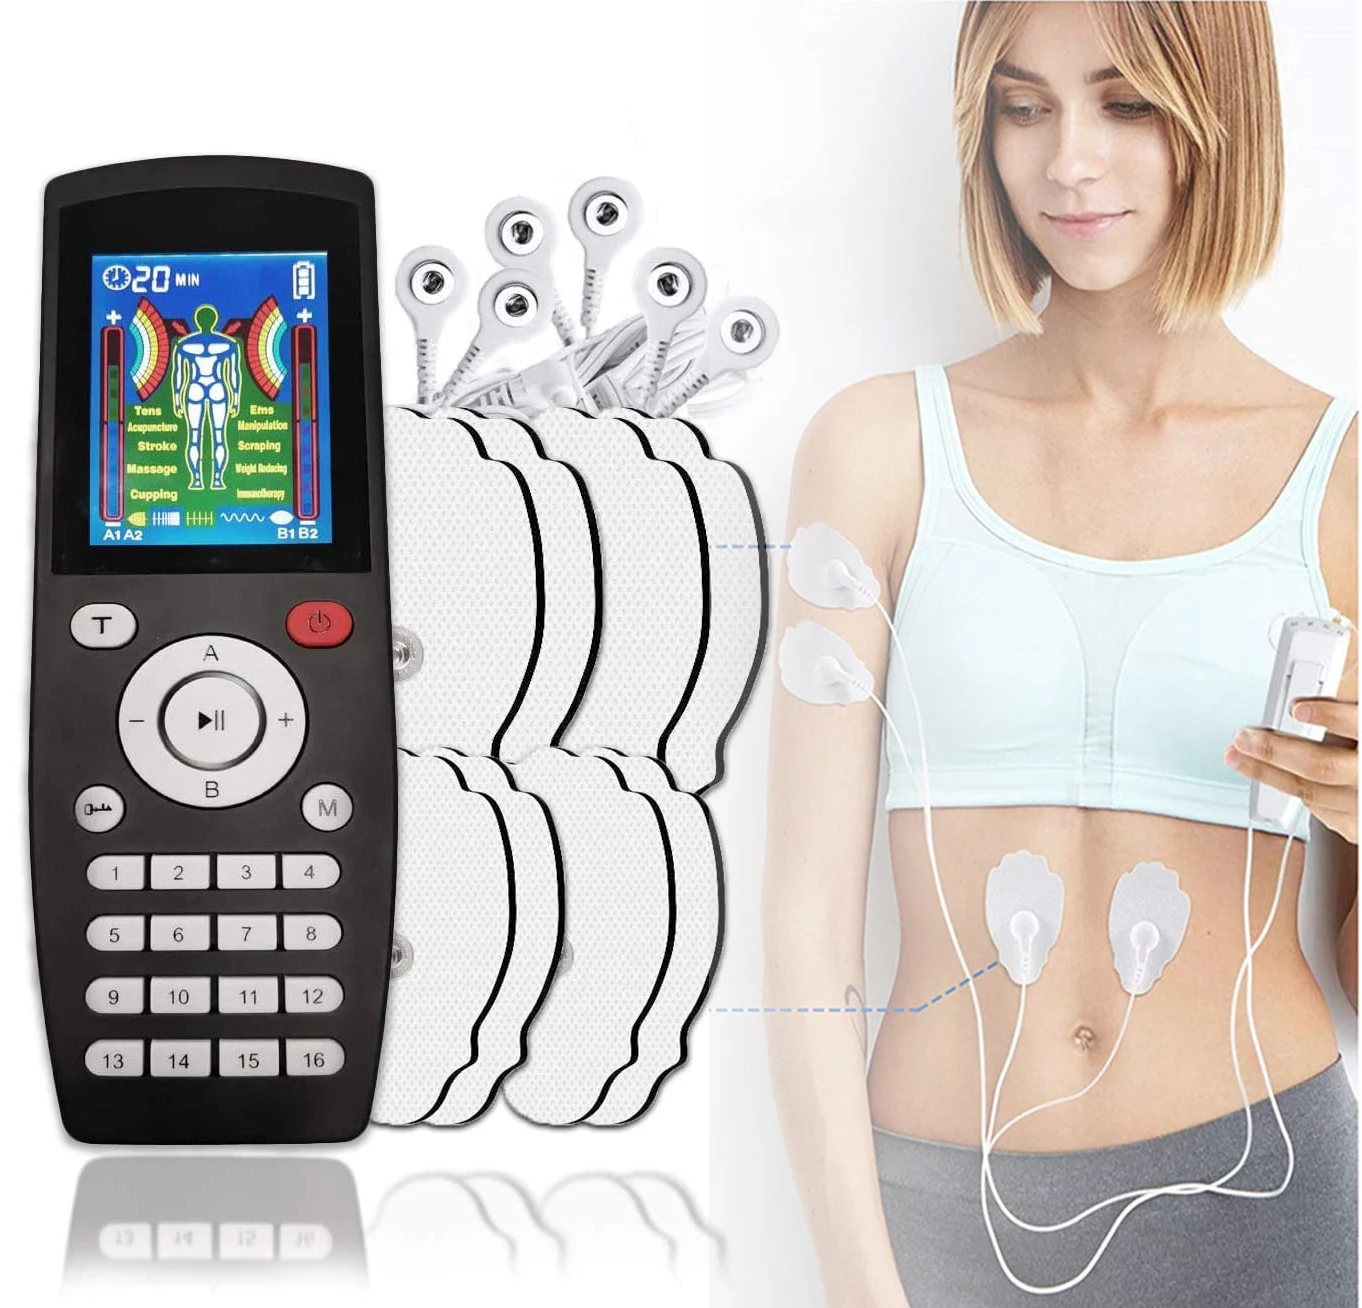 

16Modes Electroestimulador Muscle Stimulator Physiotherapy TENS Machine EMS Unit Pulse Pad Therapy Best Pain Relief Massage Body